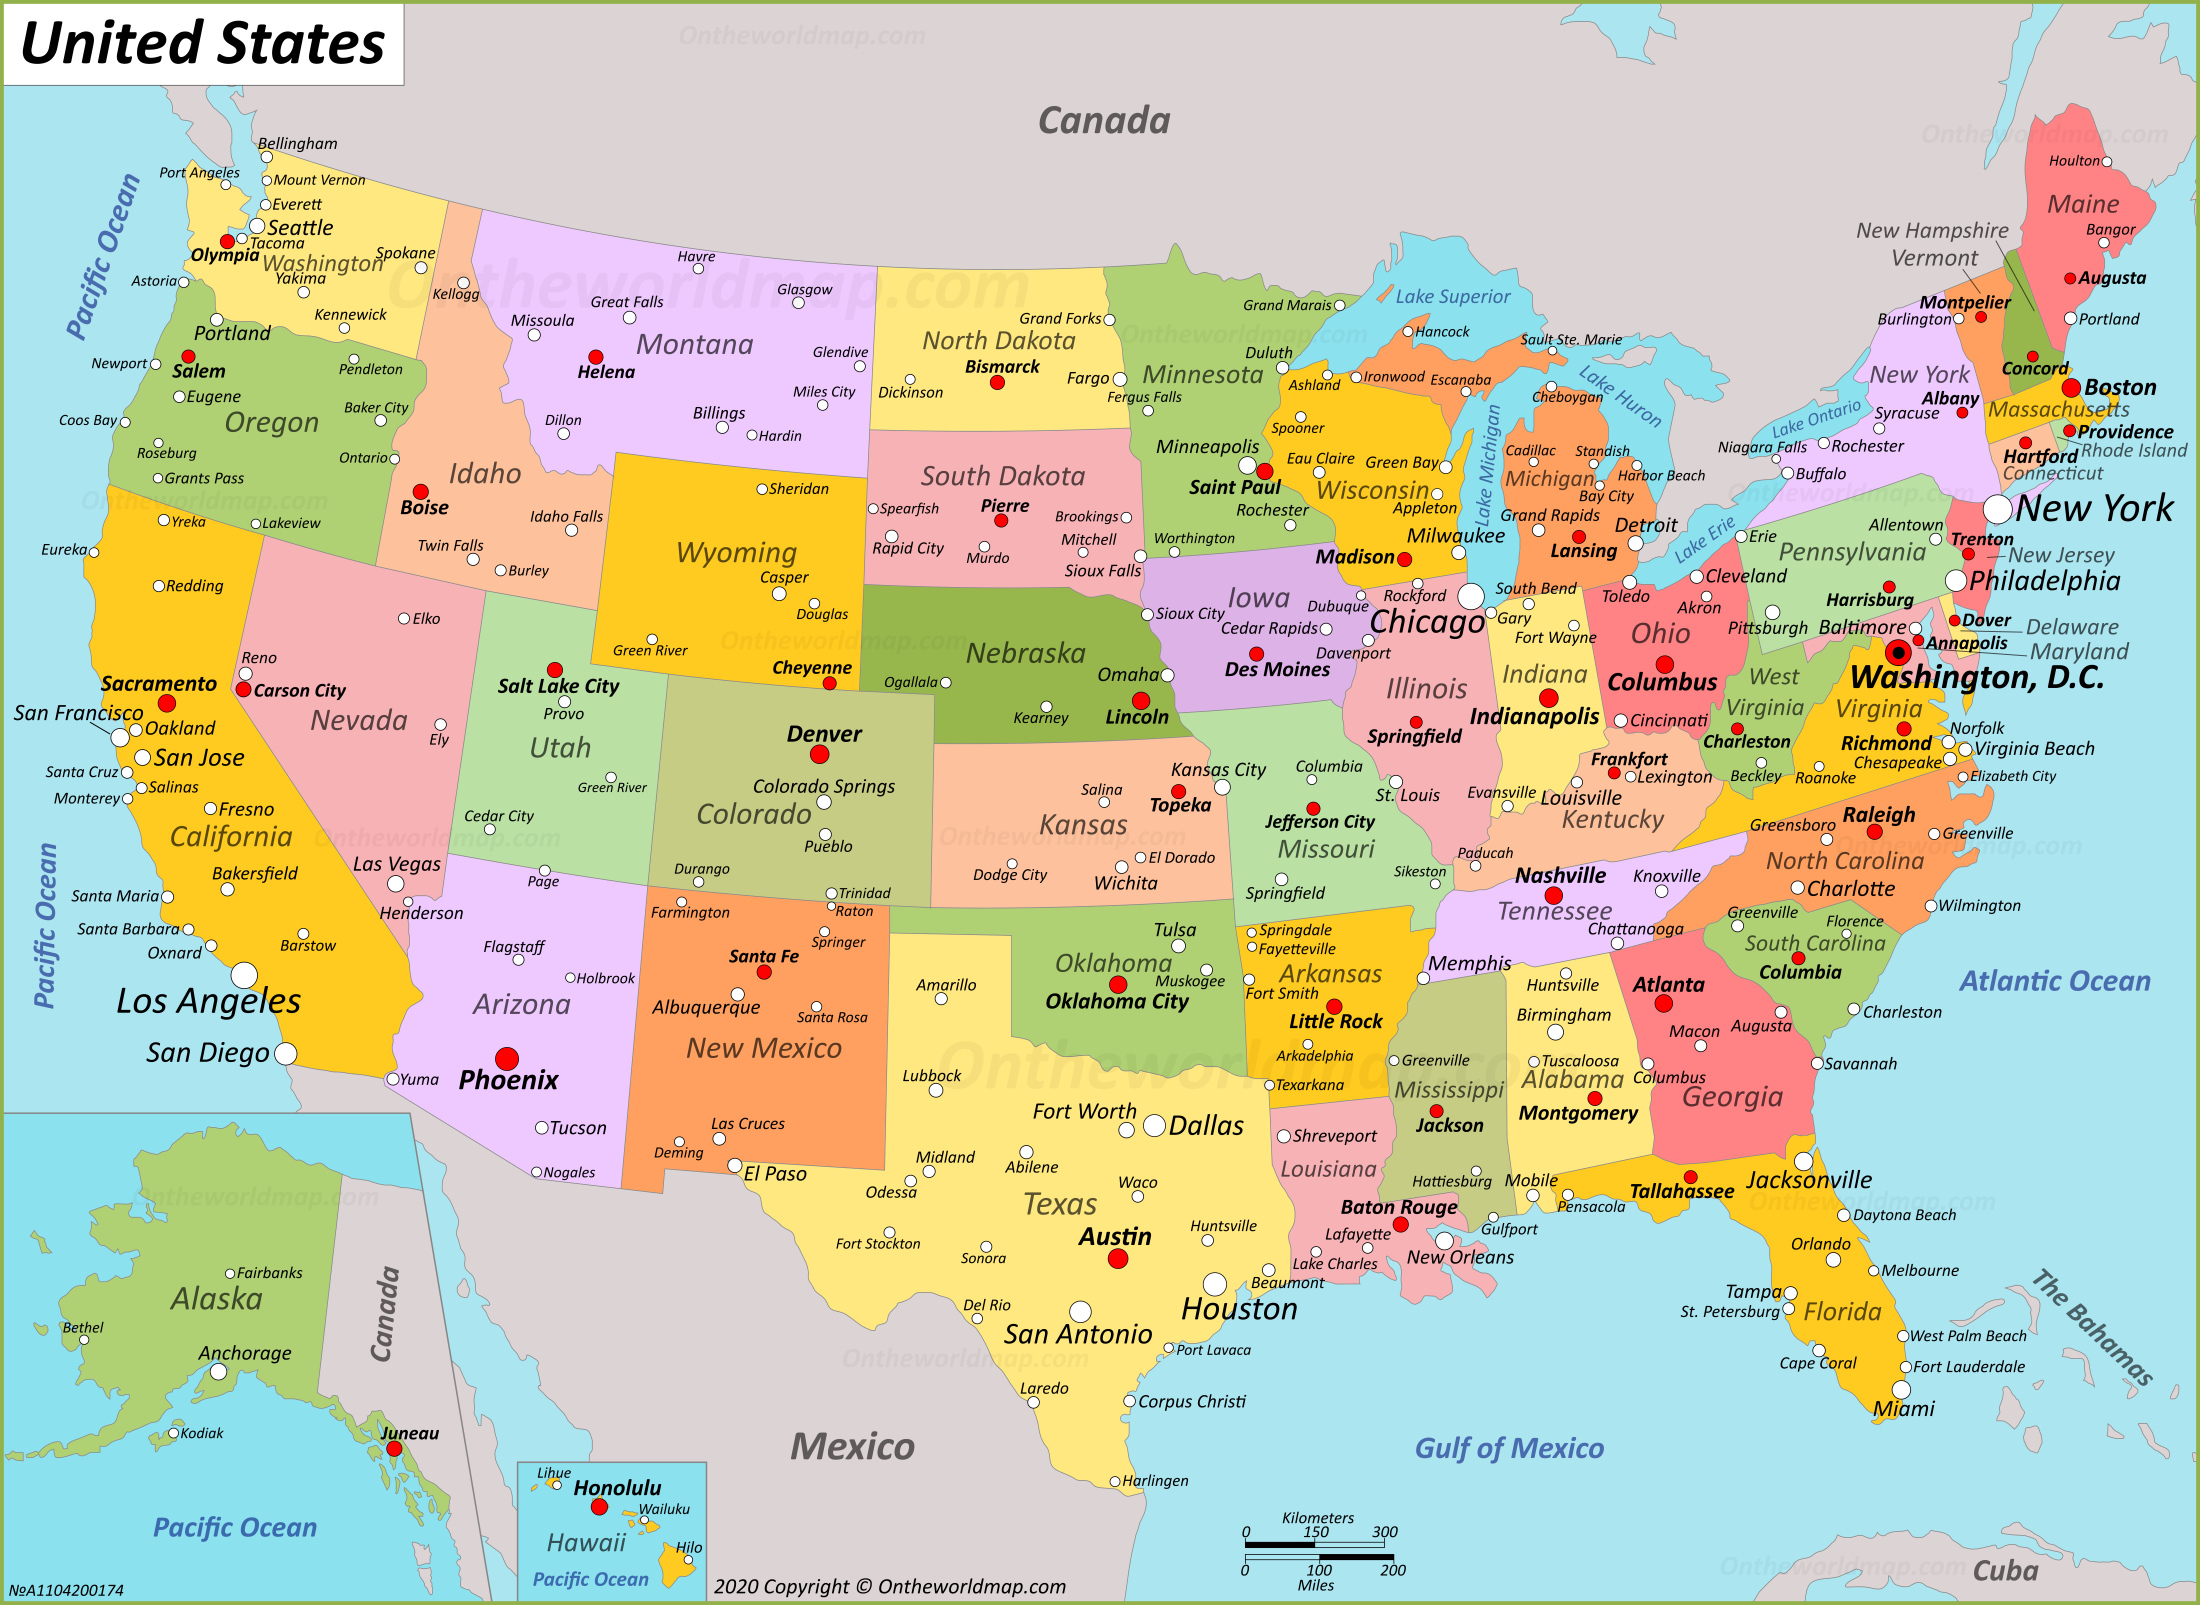 Usa Map Maps Of United States Of America With States State Capitals